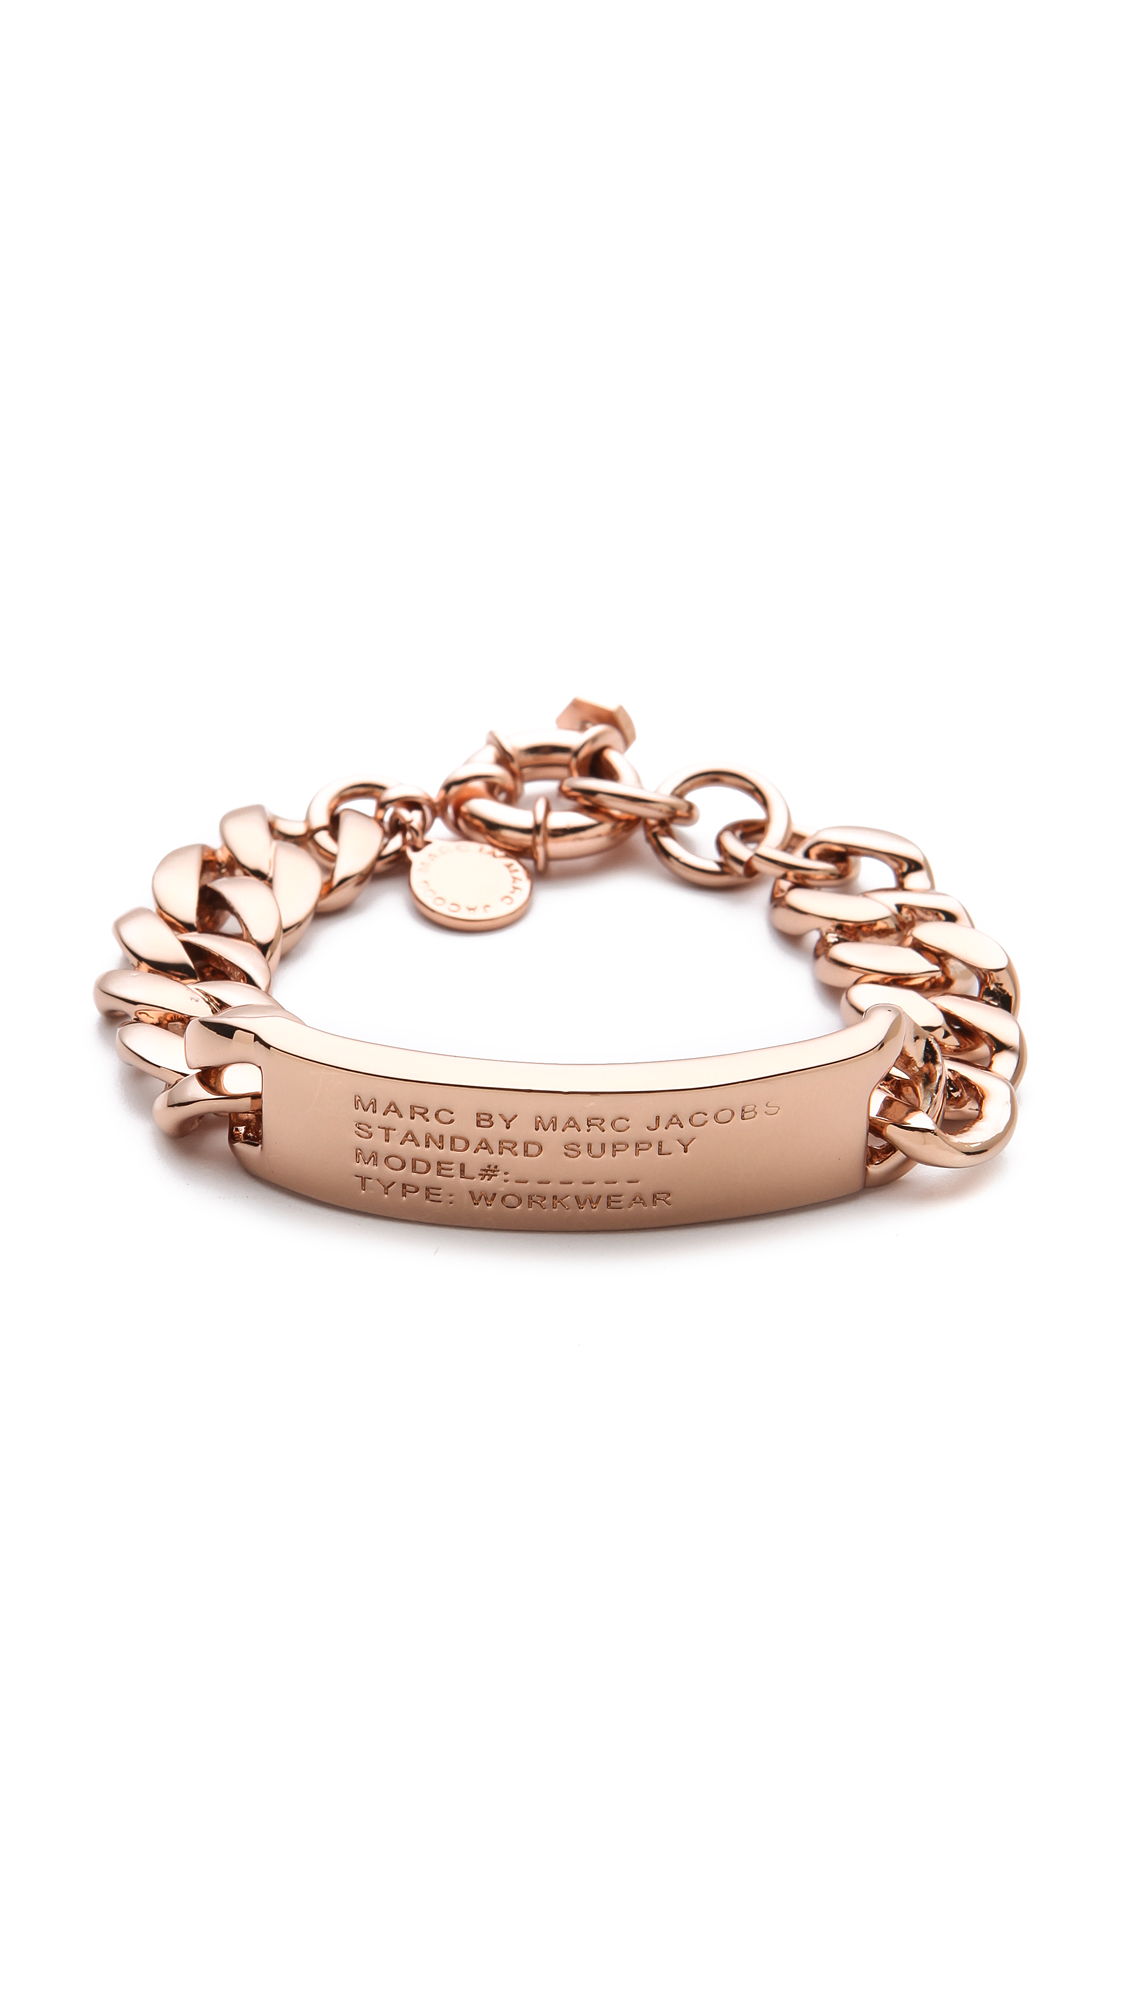 Marc By Marc Jacobs Standard Supply Id Bracelet in Rose Gold (Metallic) |  Lyst